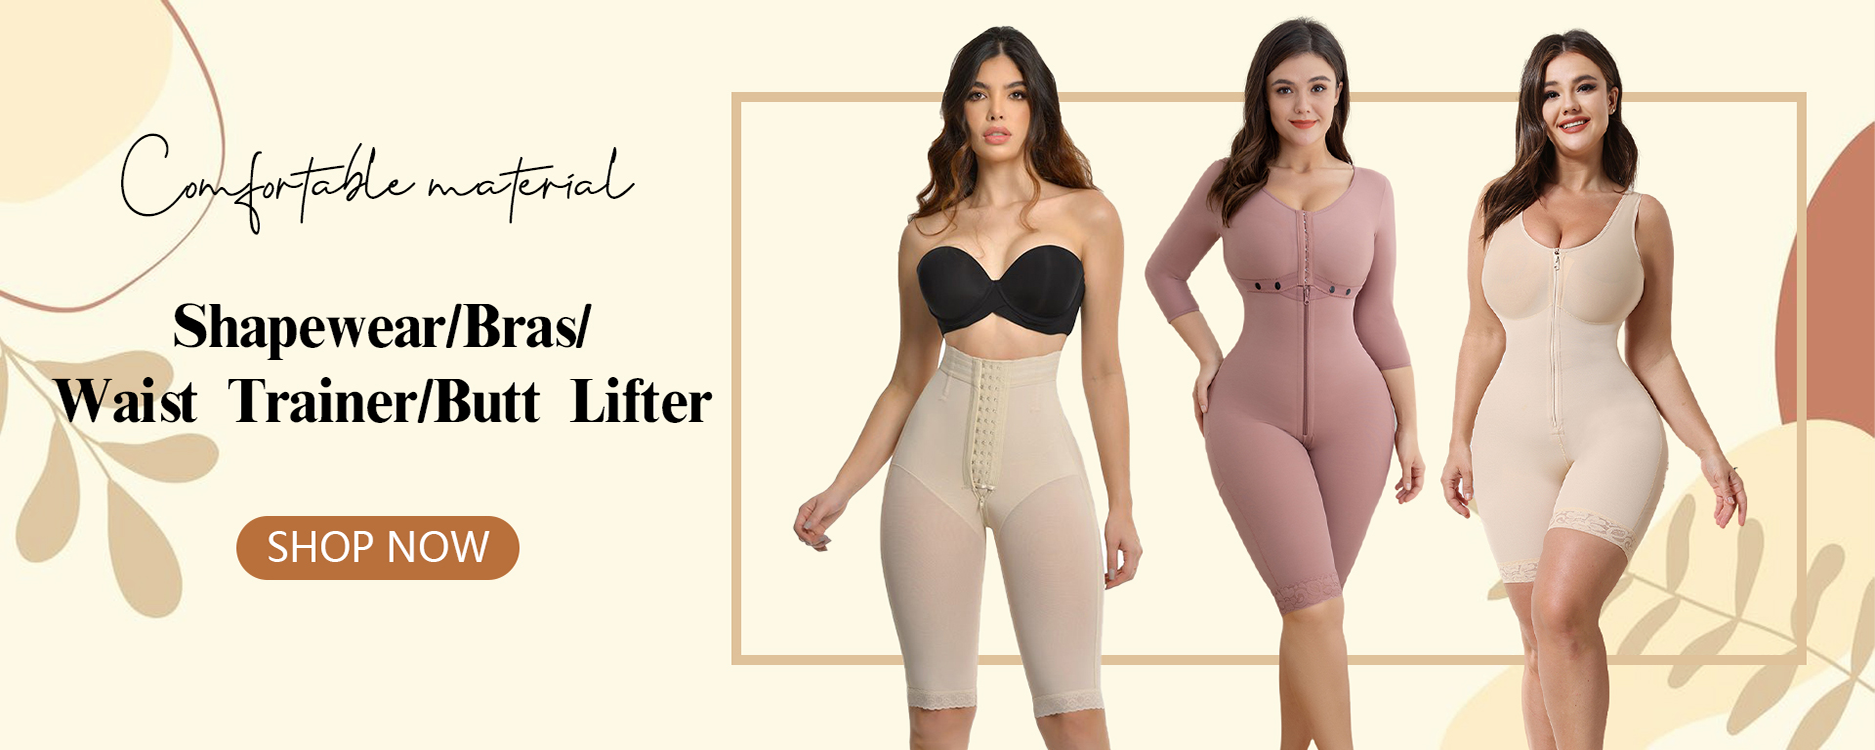 High Compression Shapewear With Hook And Eye Front Closure Shaper  Adjustable Bra Slimming Bodysuit Fajas Reductoras Y Modeladora - Shapers -  AliExpress